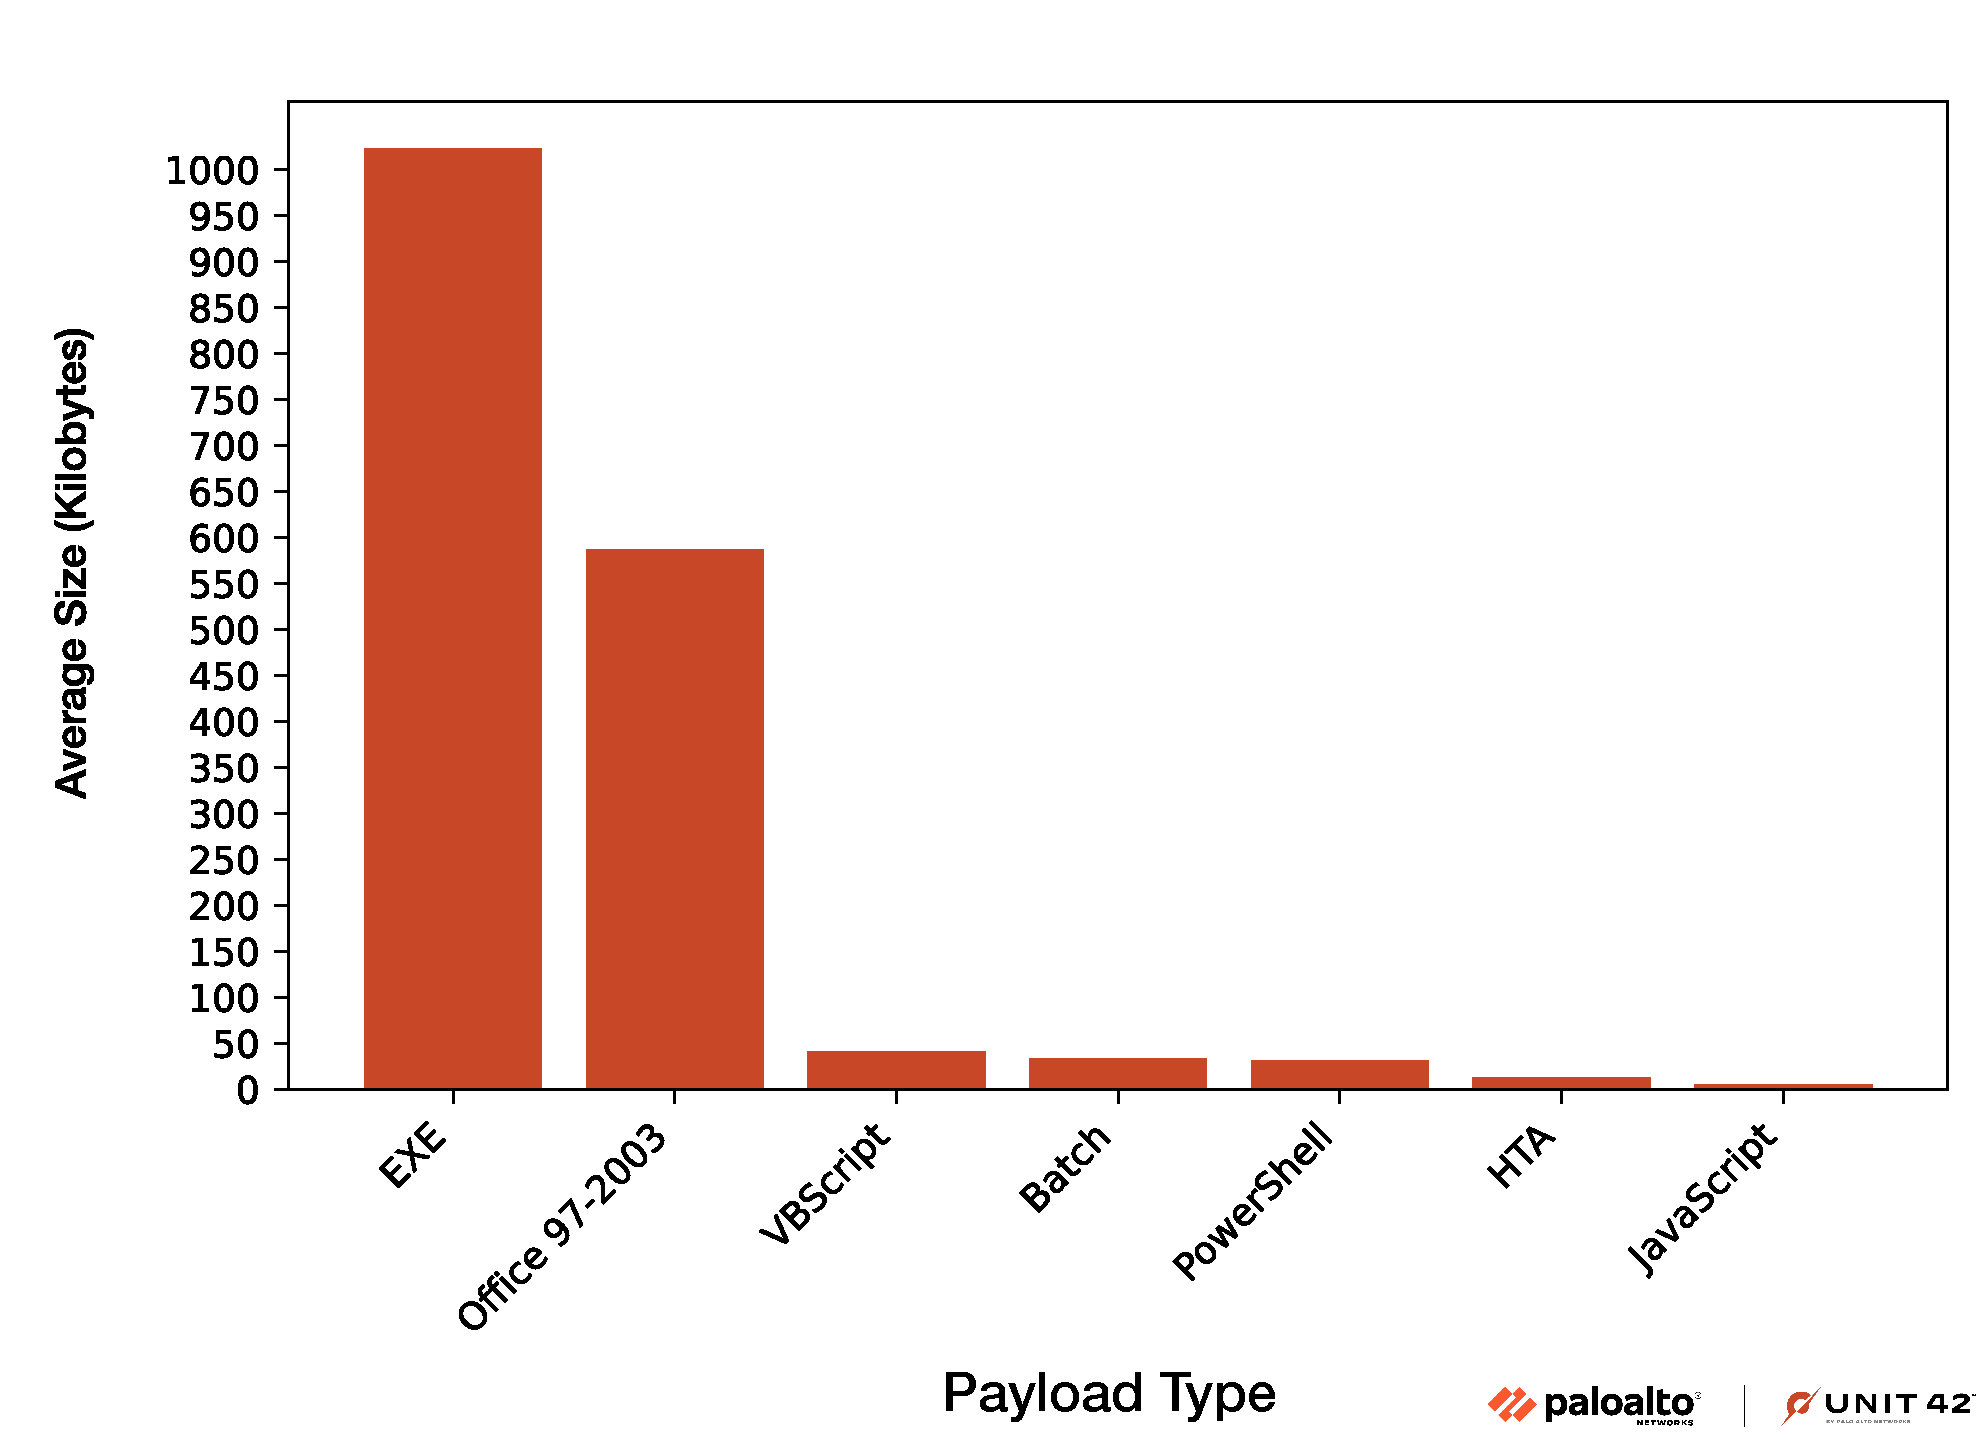 Image 6 is a column chart showing the distribution of payload type by size with EXE the largest at over 1,000 KB. The second largest is Office 97-2003. VBScript, Batch, PowerShell, HTA and JavaScript are all much smaller at under 50 KB. 